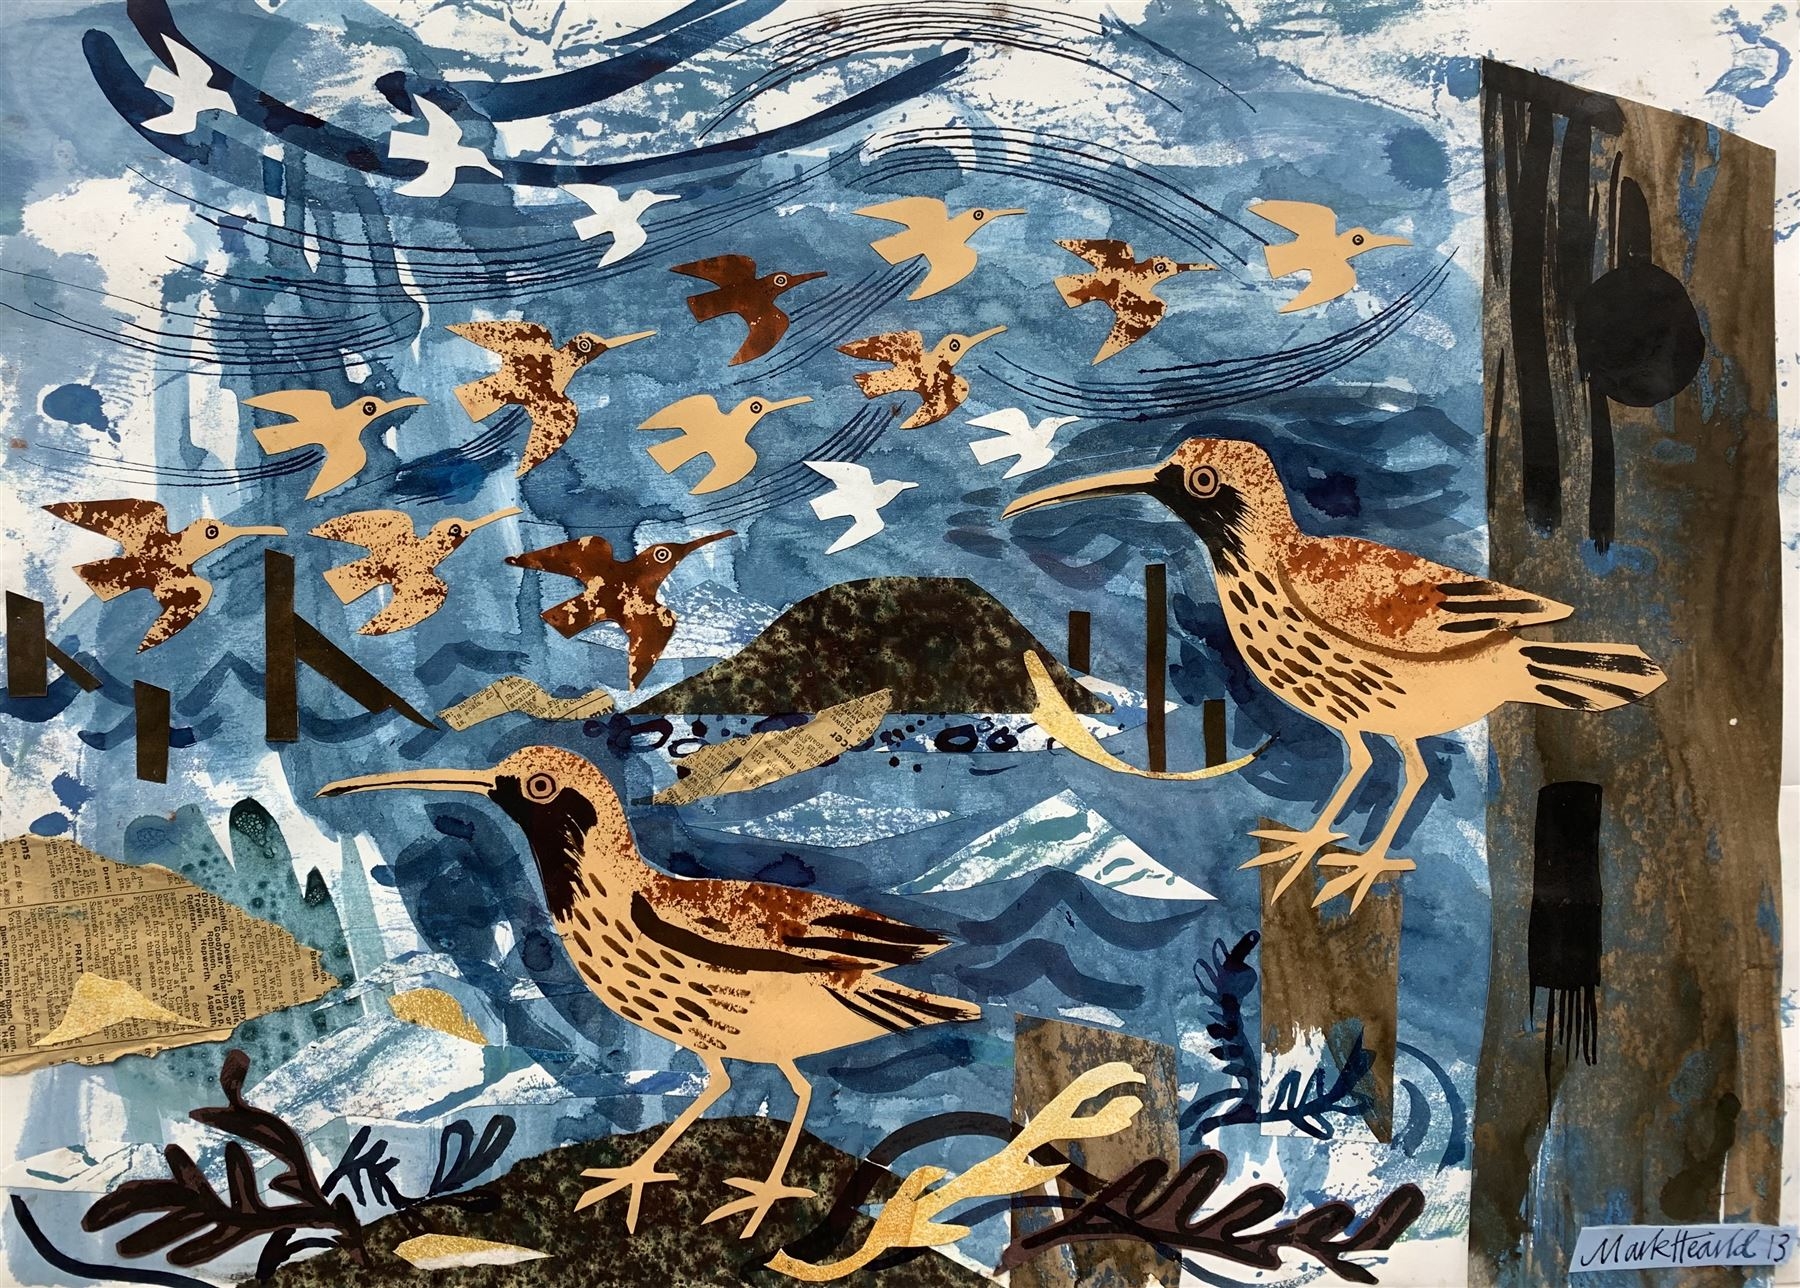 Artwork by Mark Hearld, Seabirds, Made of mixed media collage on paper